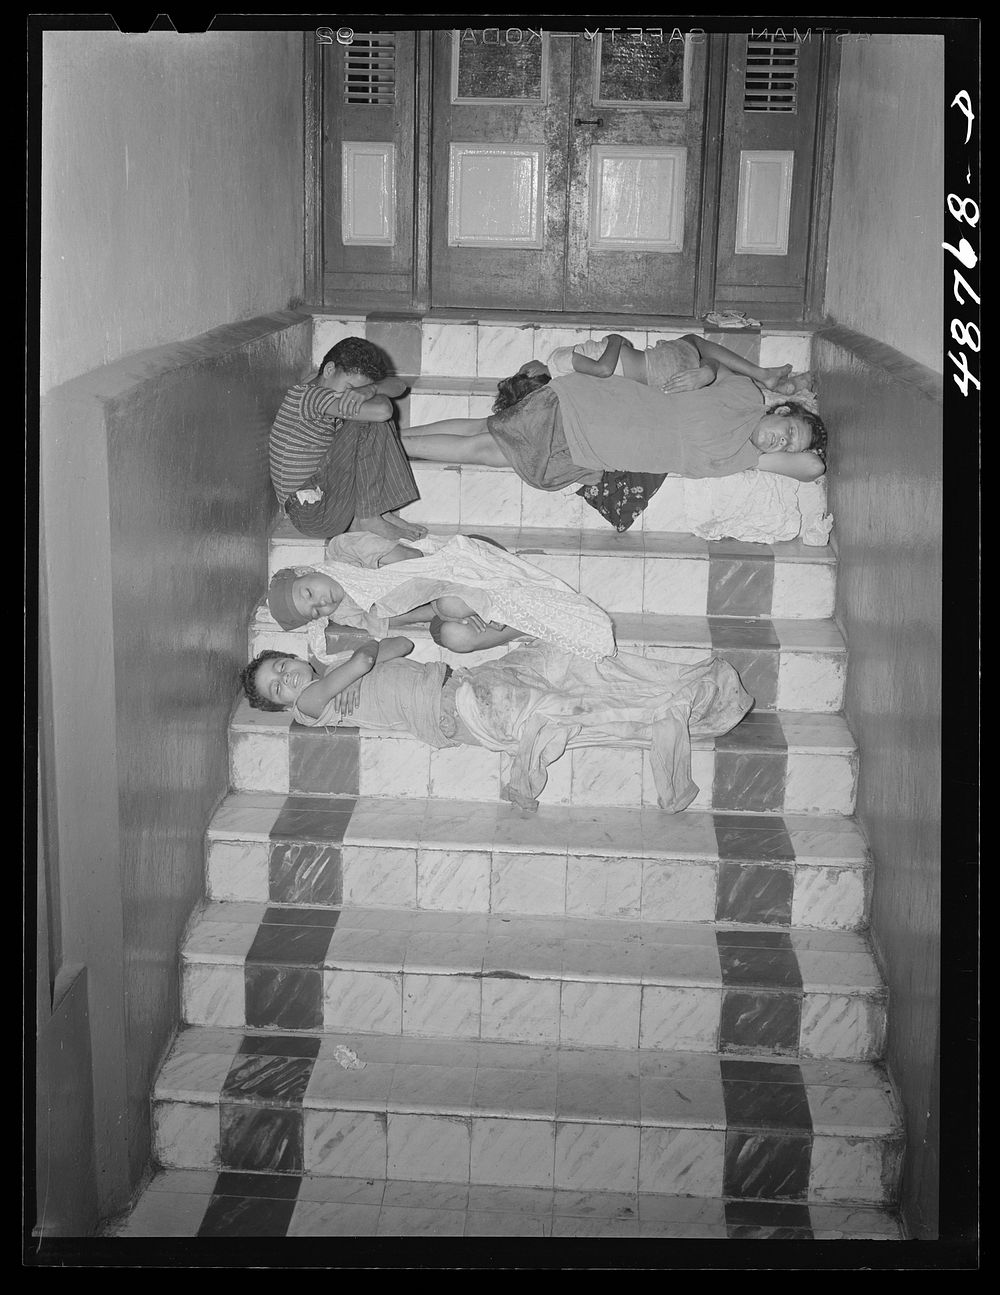 Caguas, Puerto Rico. Homeless people sleeping in the hallway of an apartment house. Sourced from the Library of Congress.